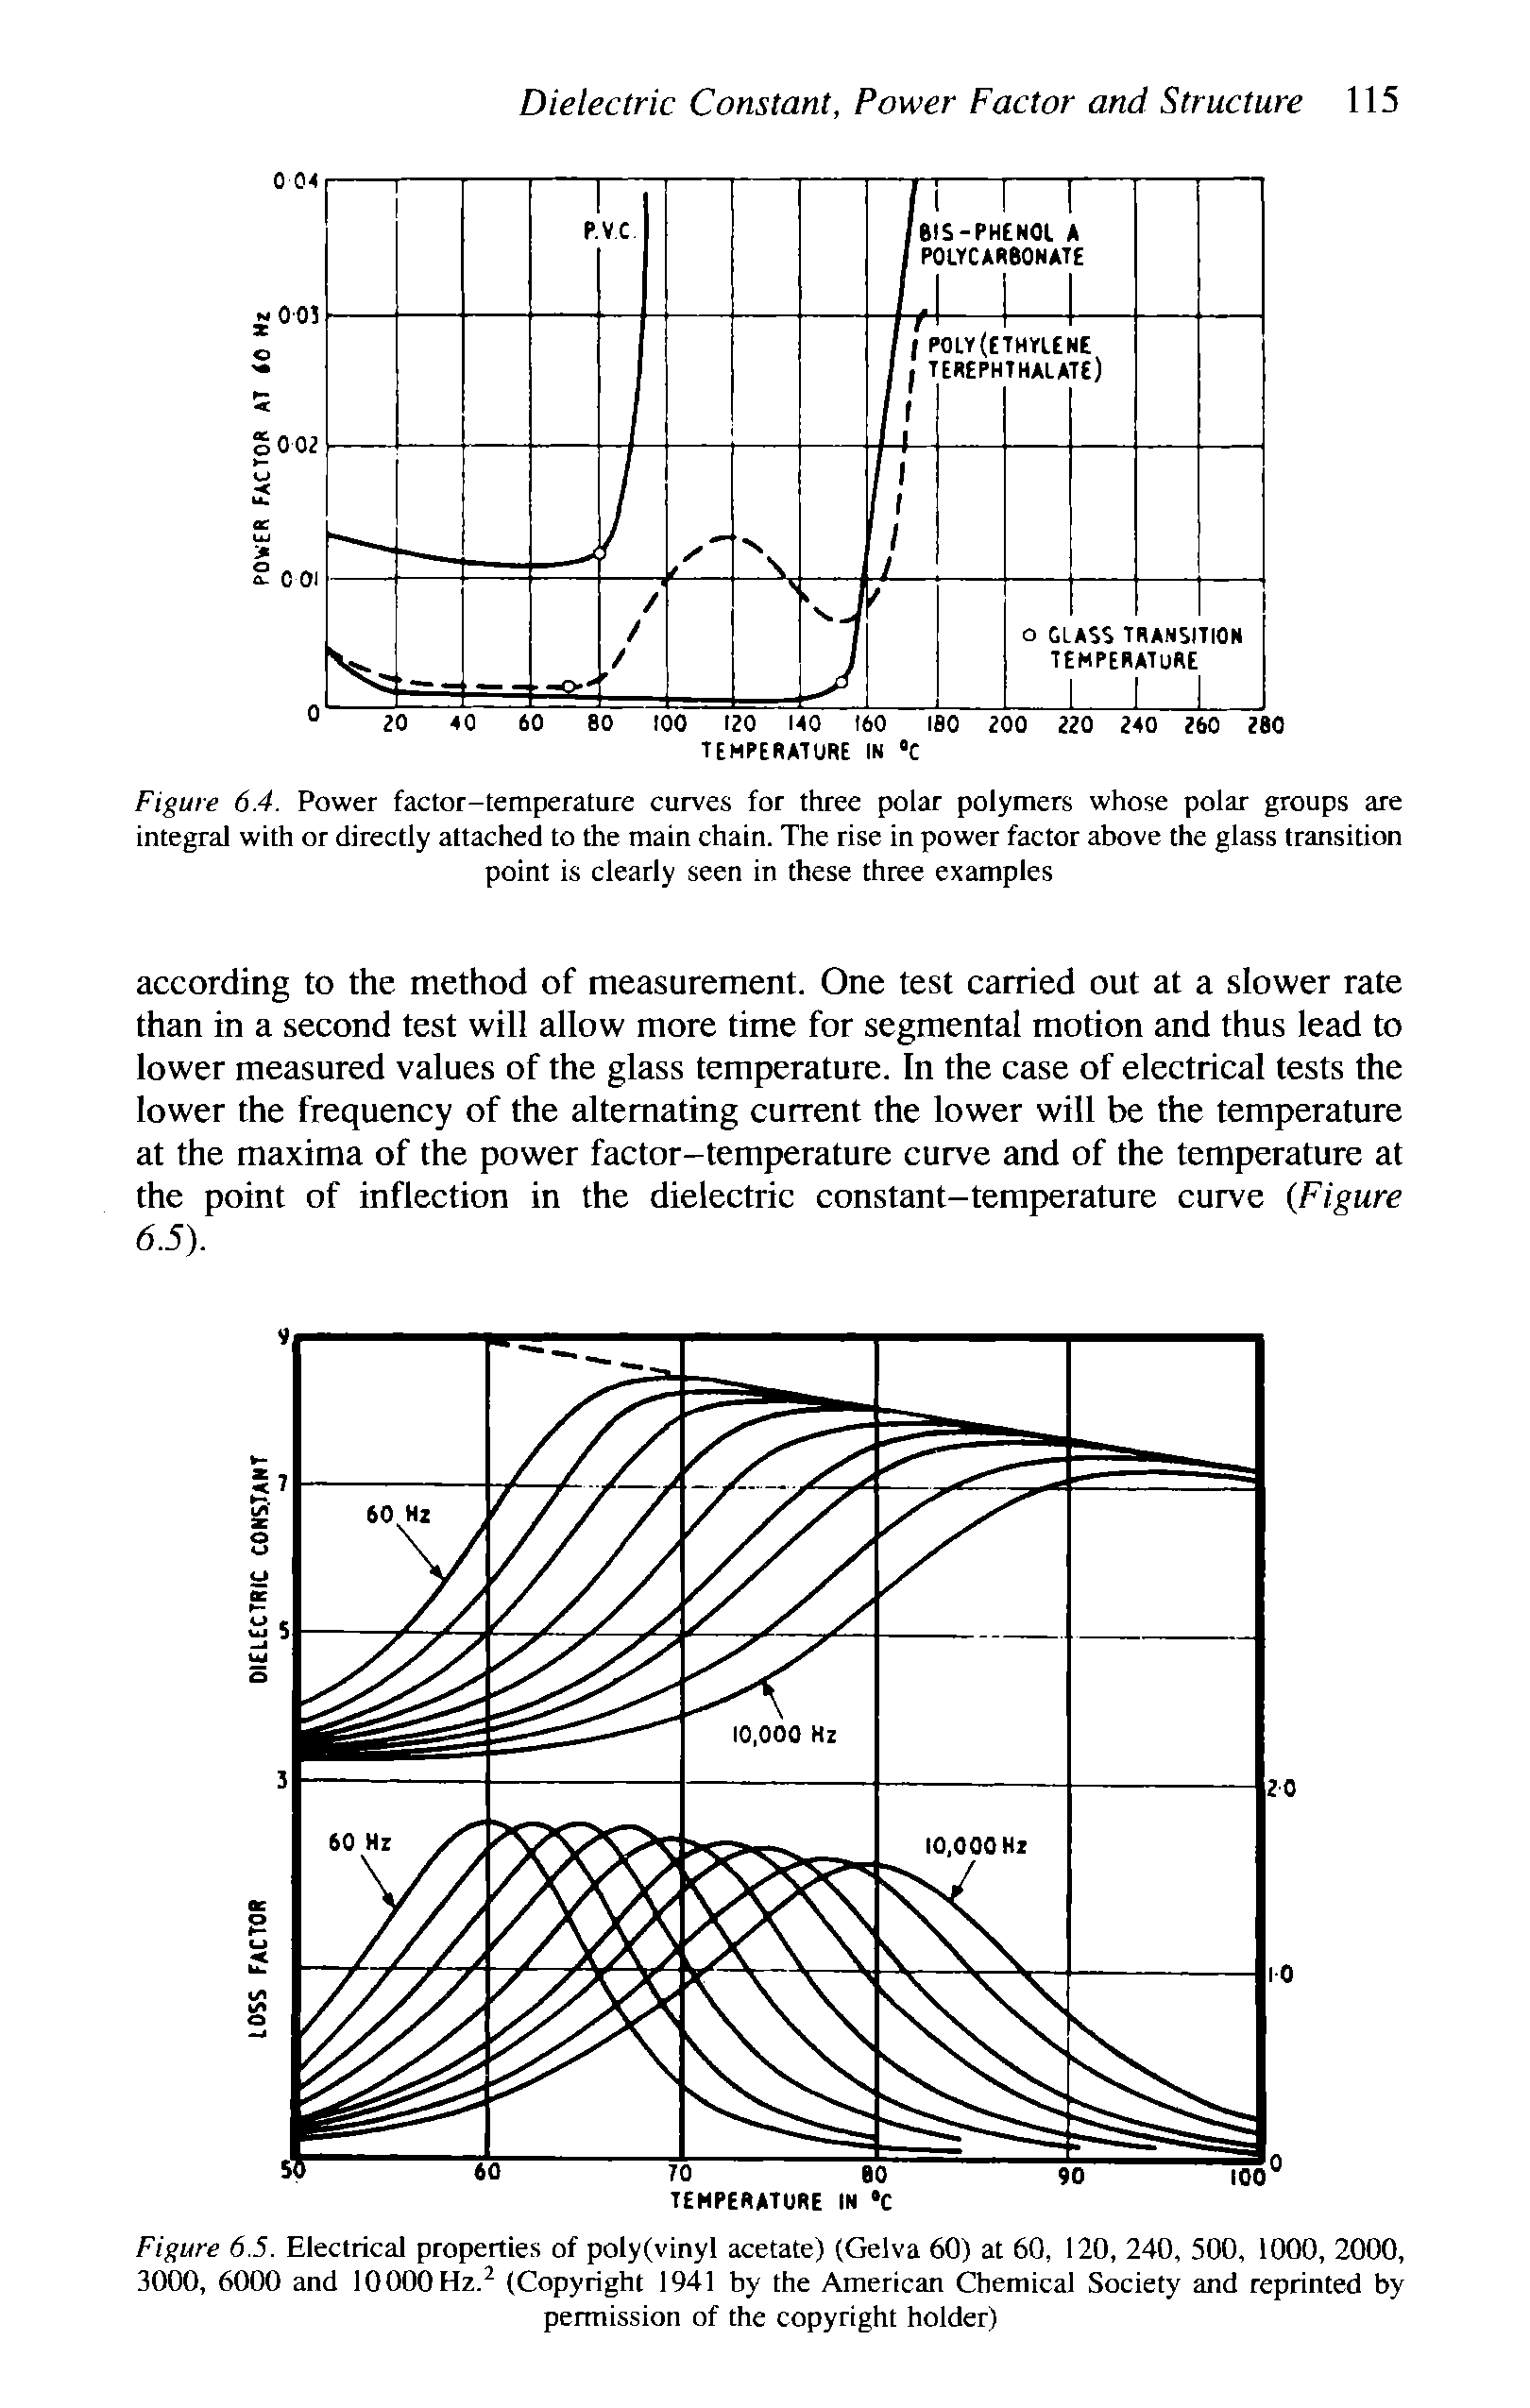 Figure 6.4. Power factor-temperature curves for three polar polymers whose polar groups are integral with or directly attached to the main chain. The rise in power factor above the glass transition point is clearly seen in these three examples...